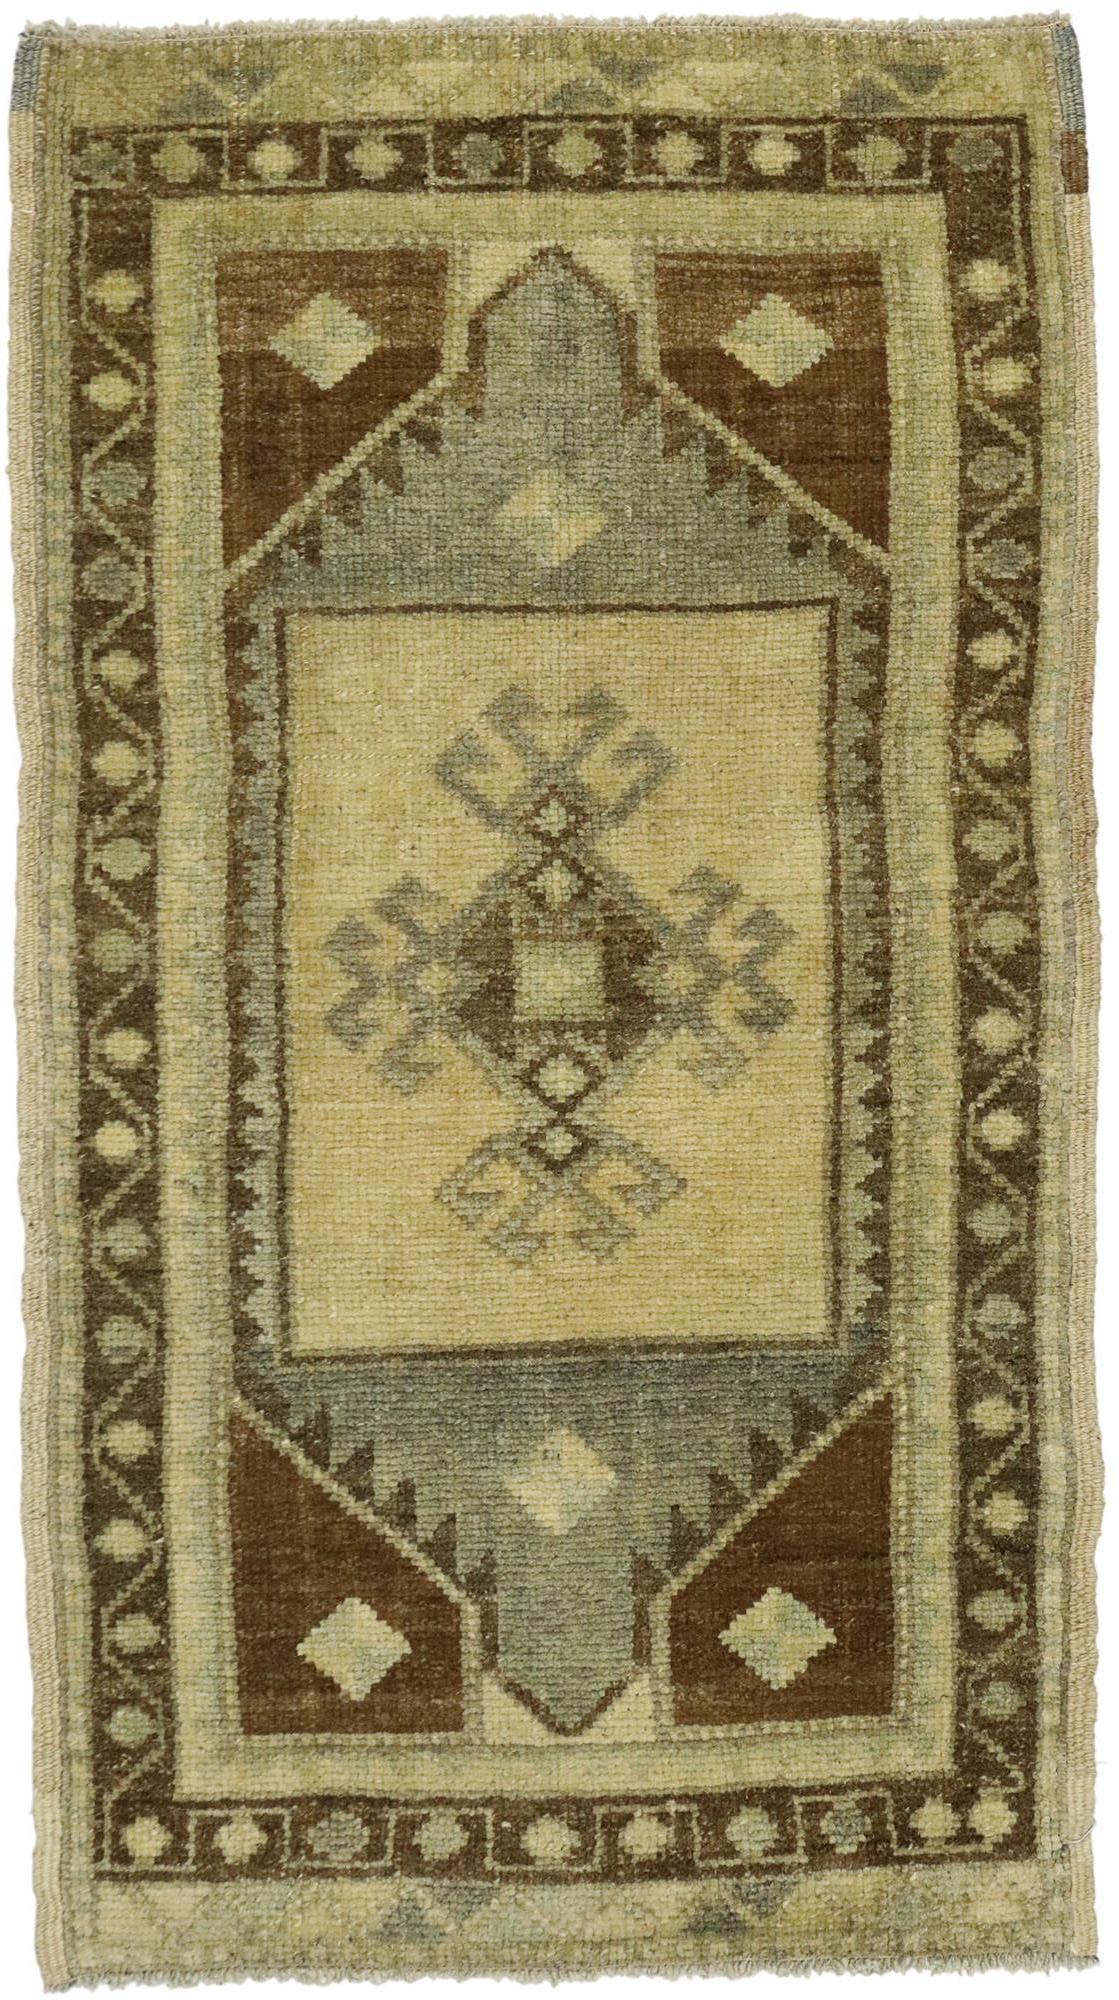 50798 Vintage Turkish Oushak Yastik Scatter Rug, Small Accent Rug 01'09 X 03'02. ​This hand-knotted wool vintage Turkish Oushak Yastik scatter rug features a rectangular medallion patterned with Ram's Horn motifs overlaid upon an abrashed gray